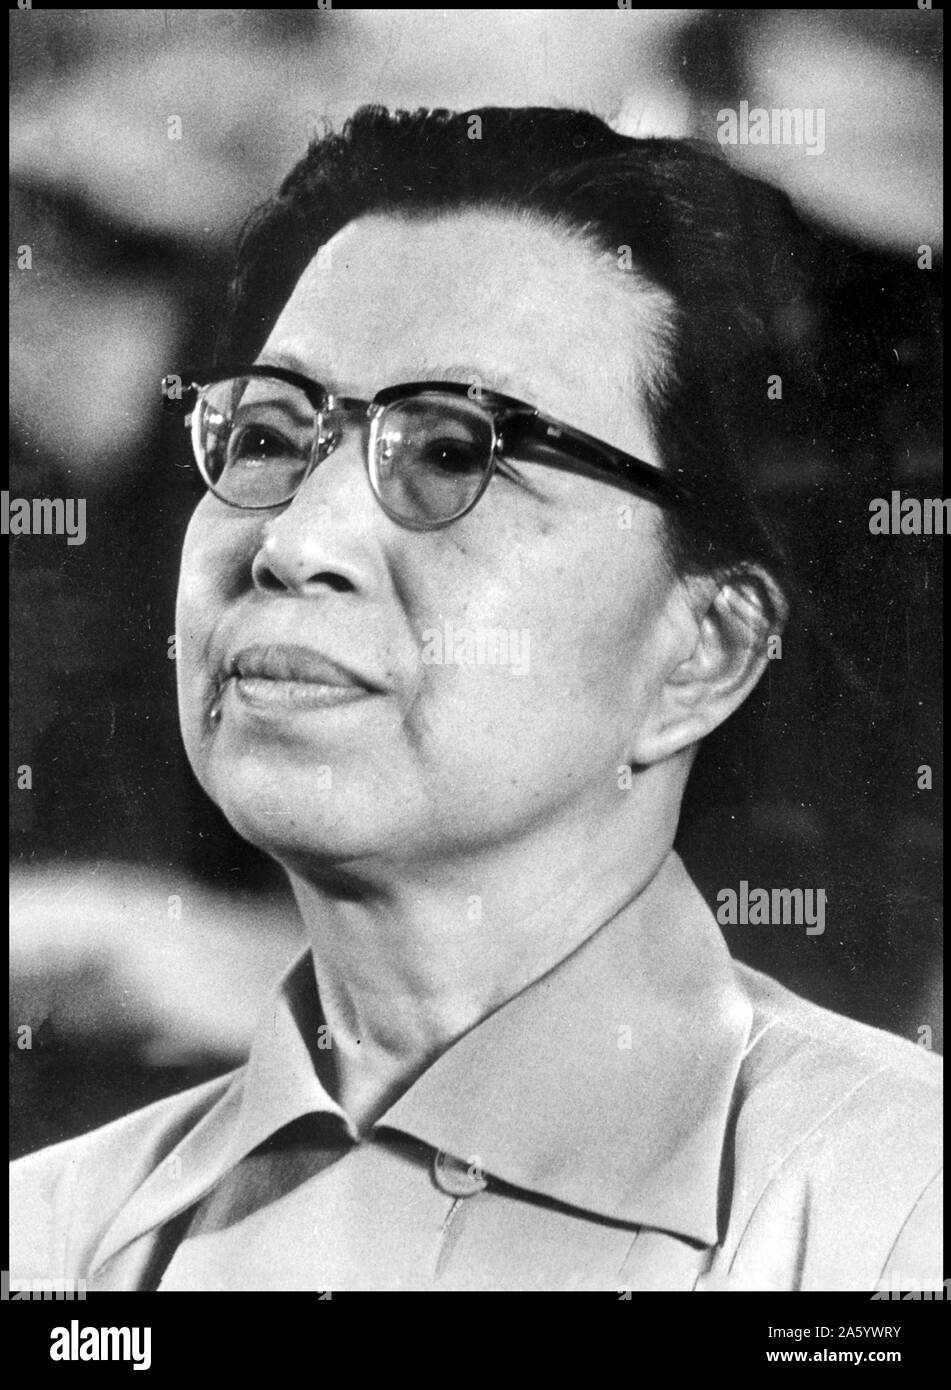 Photograph of Jiang Qing (1914-1991) Chinese actress and a major political figure during the Cultural Revolution. She was the fourth wife of Mao Zedong, the Chairman of the Communist Party of China. Dated 1976 Stock Photo